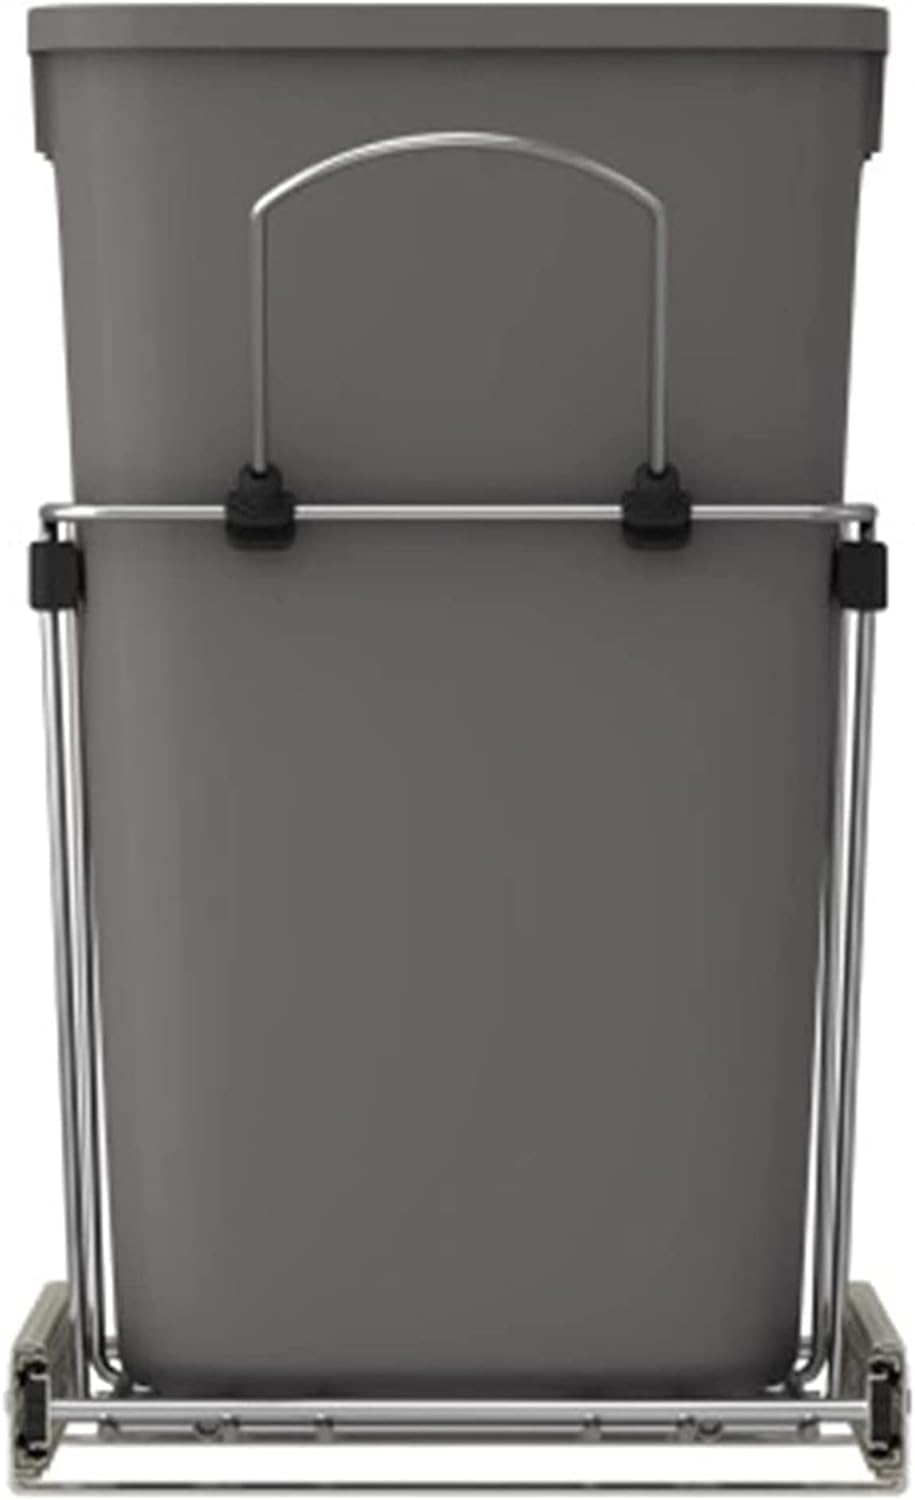 https://bigbigmart.com/wp-content/uploads/2023/10/Rev-A-Shelf-Double-Pull-Out-Trash-Can-for-Under-Kitchen-Cabinets-35-Qt-12-Gal-Garbage-Recyling-Bin-on-Full-Extension-Slides-Gray-RV-18KD-13C-S7.jpg